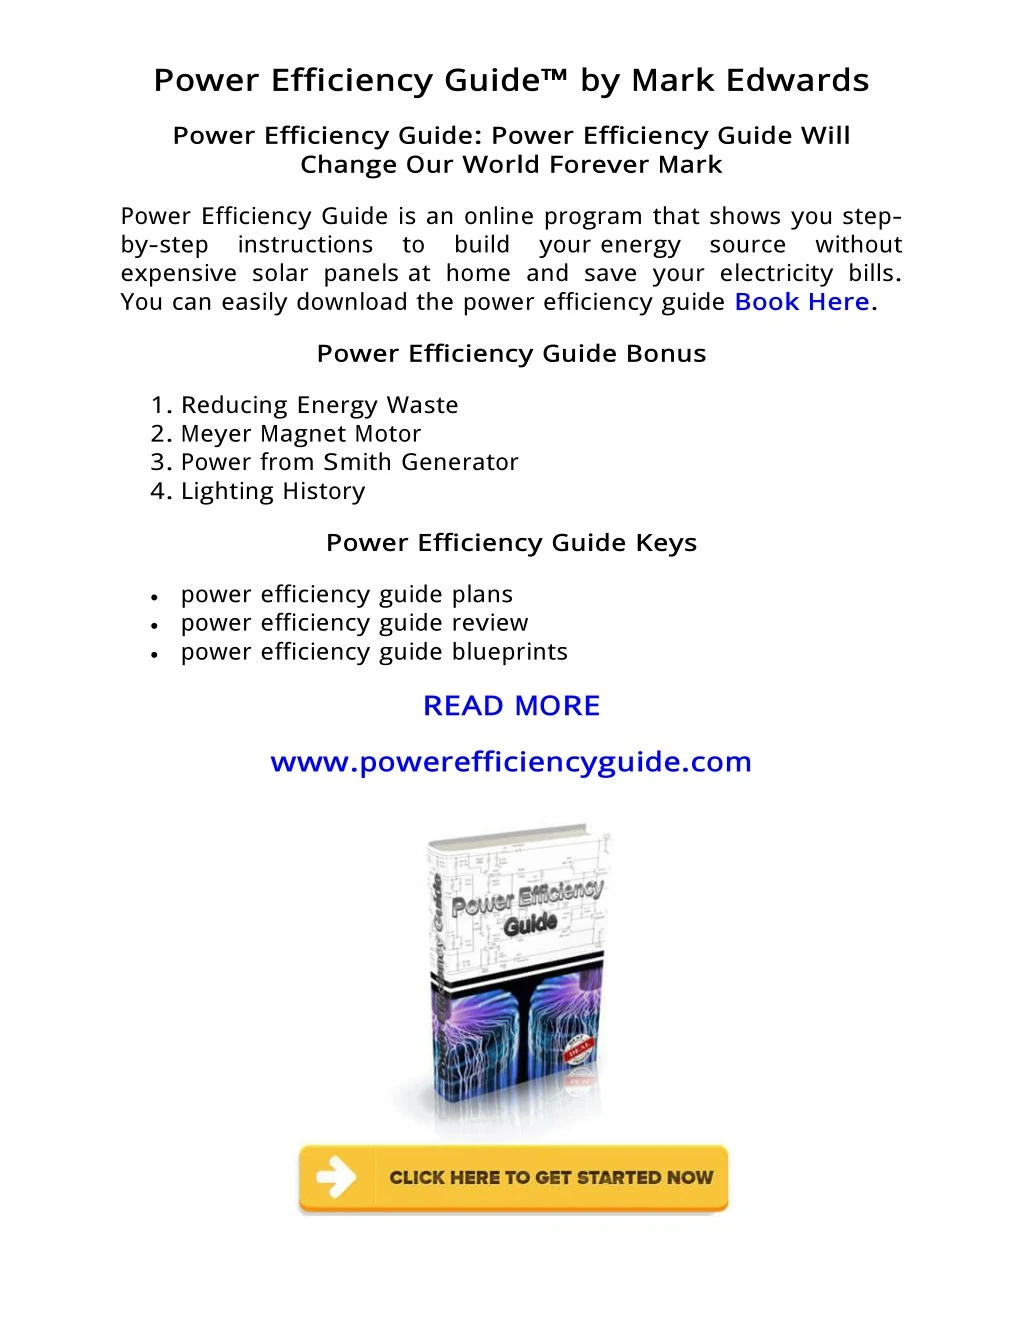 pow er efficiency guide by mark edw ards